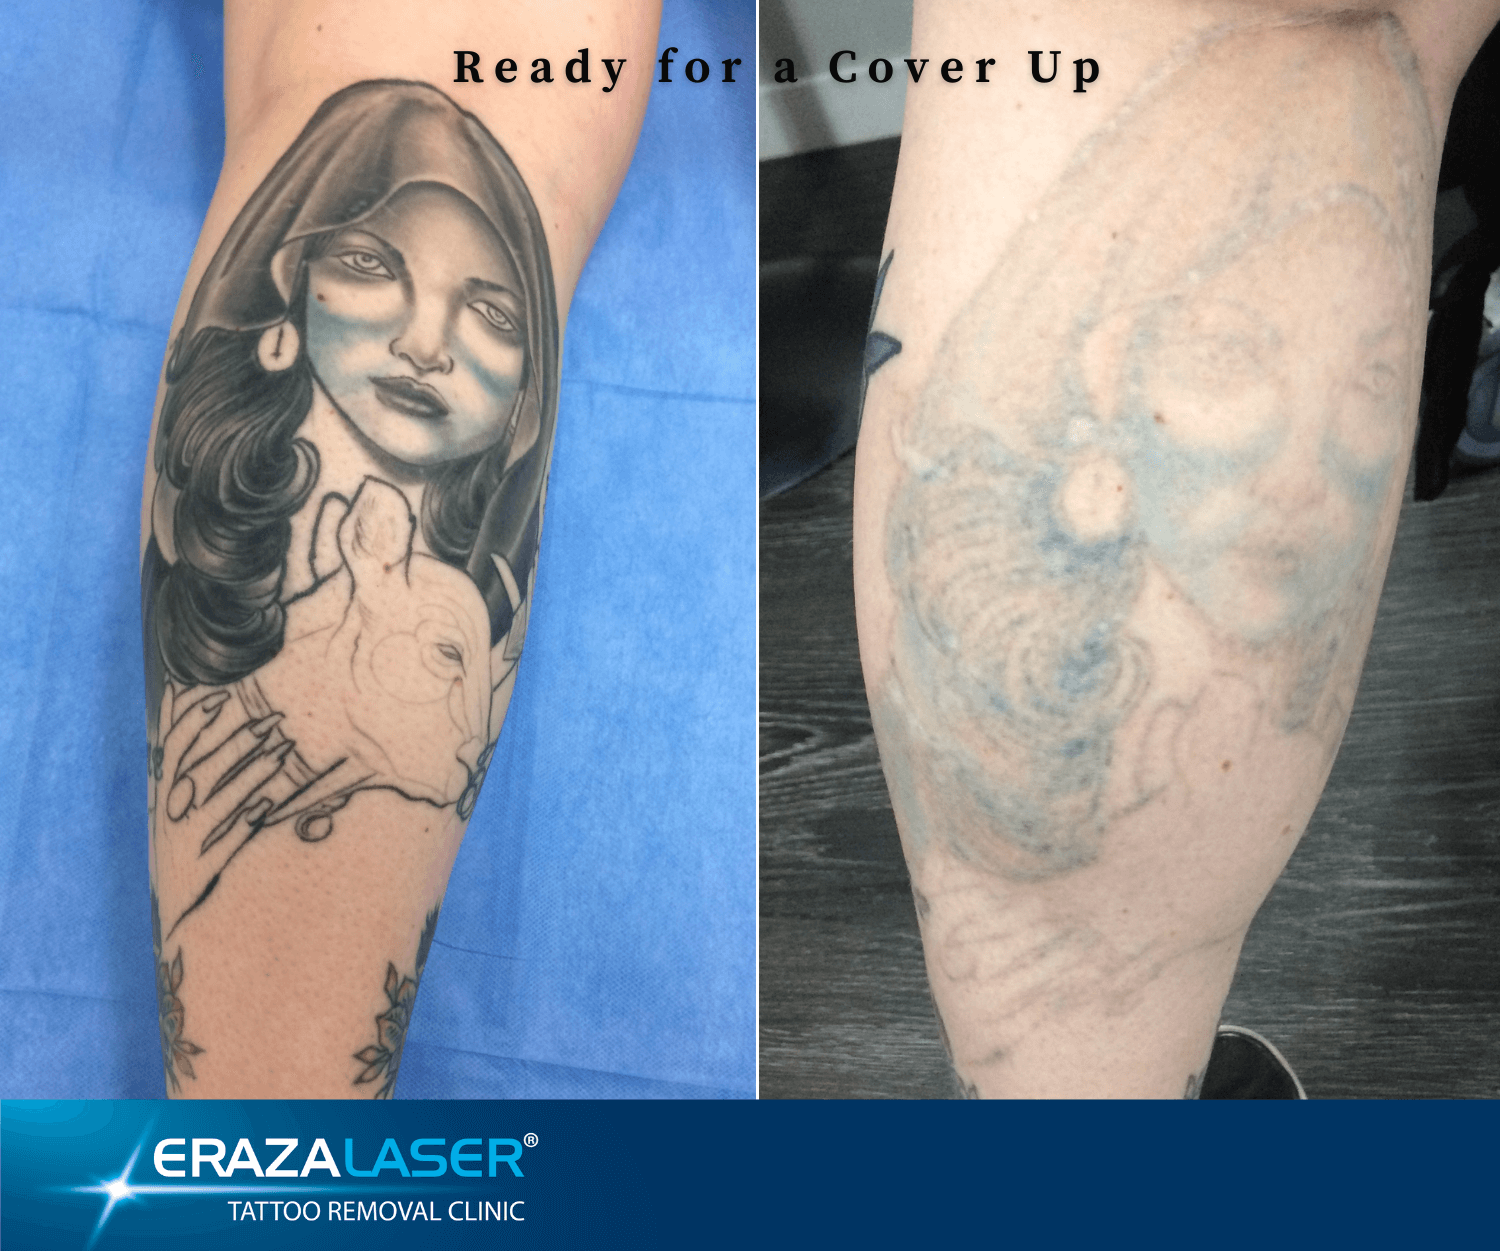 Tattoo Removal Images Before and After Photos - ERAZALASER Clinics